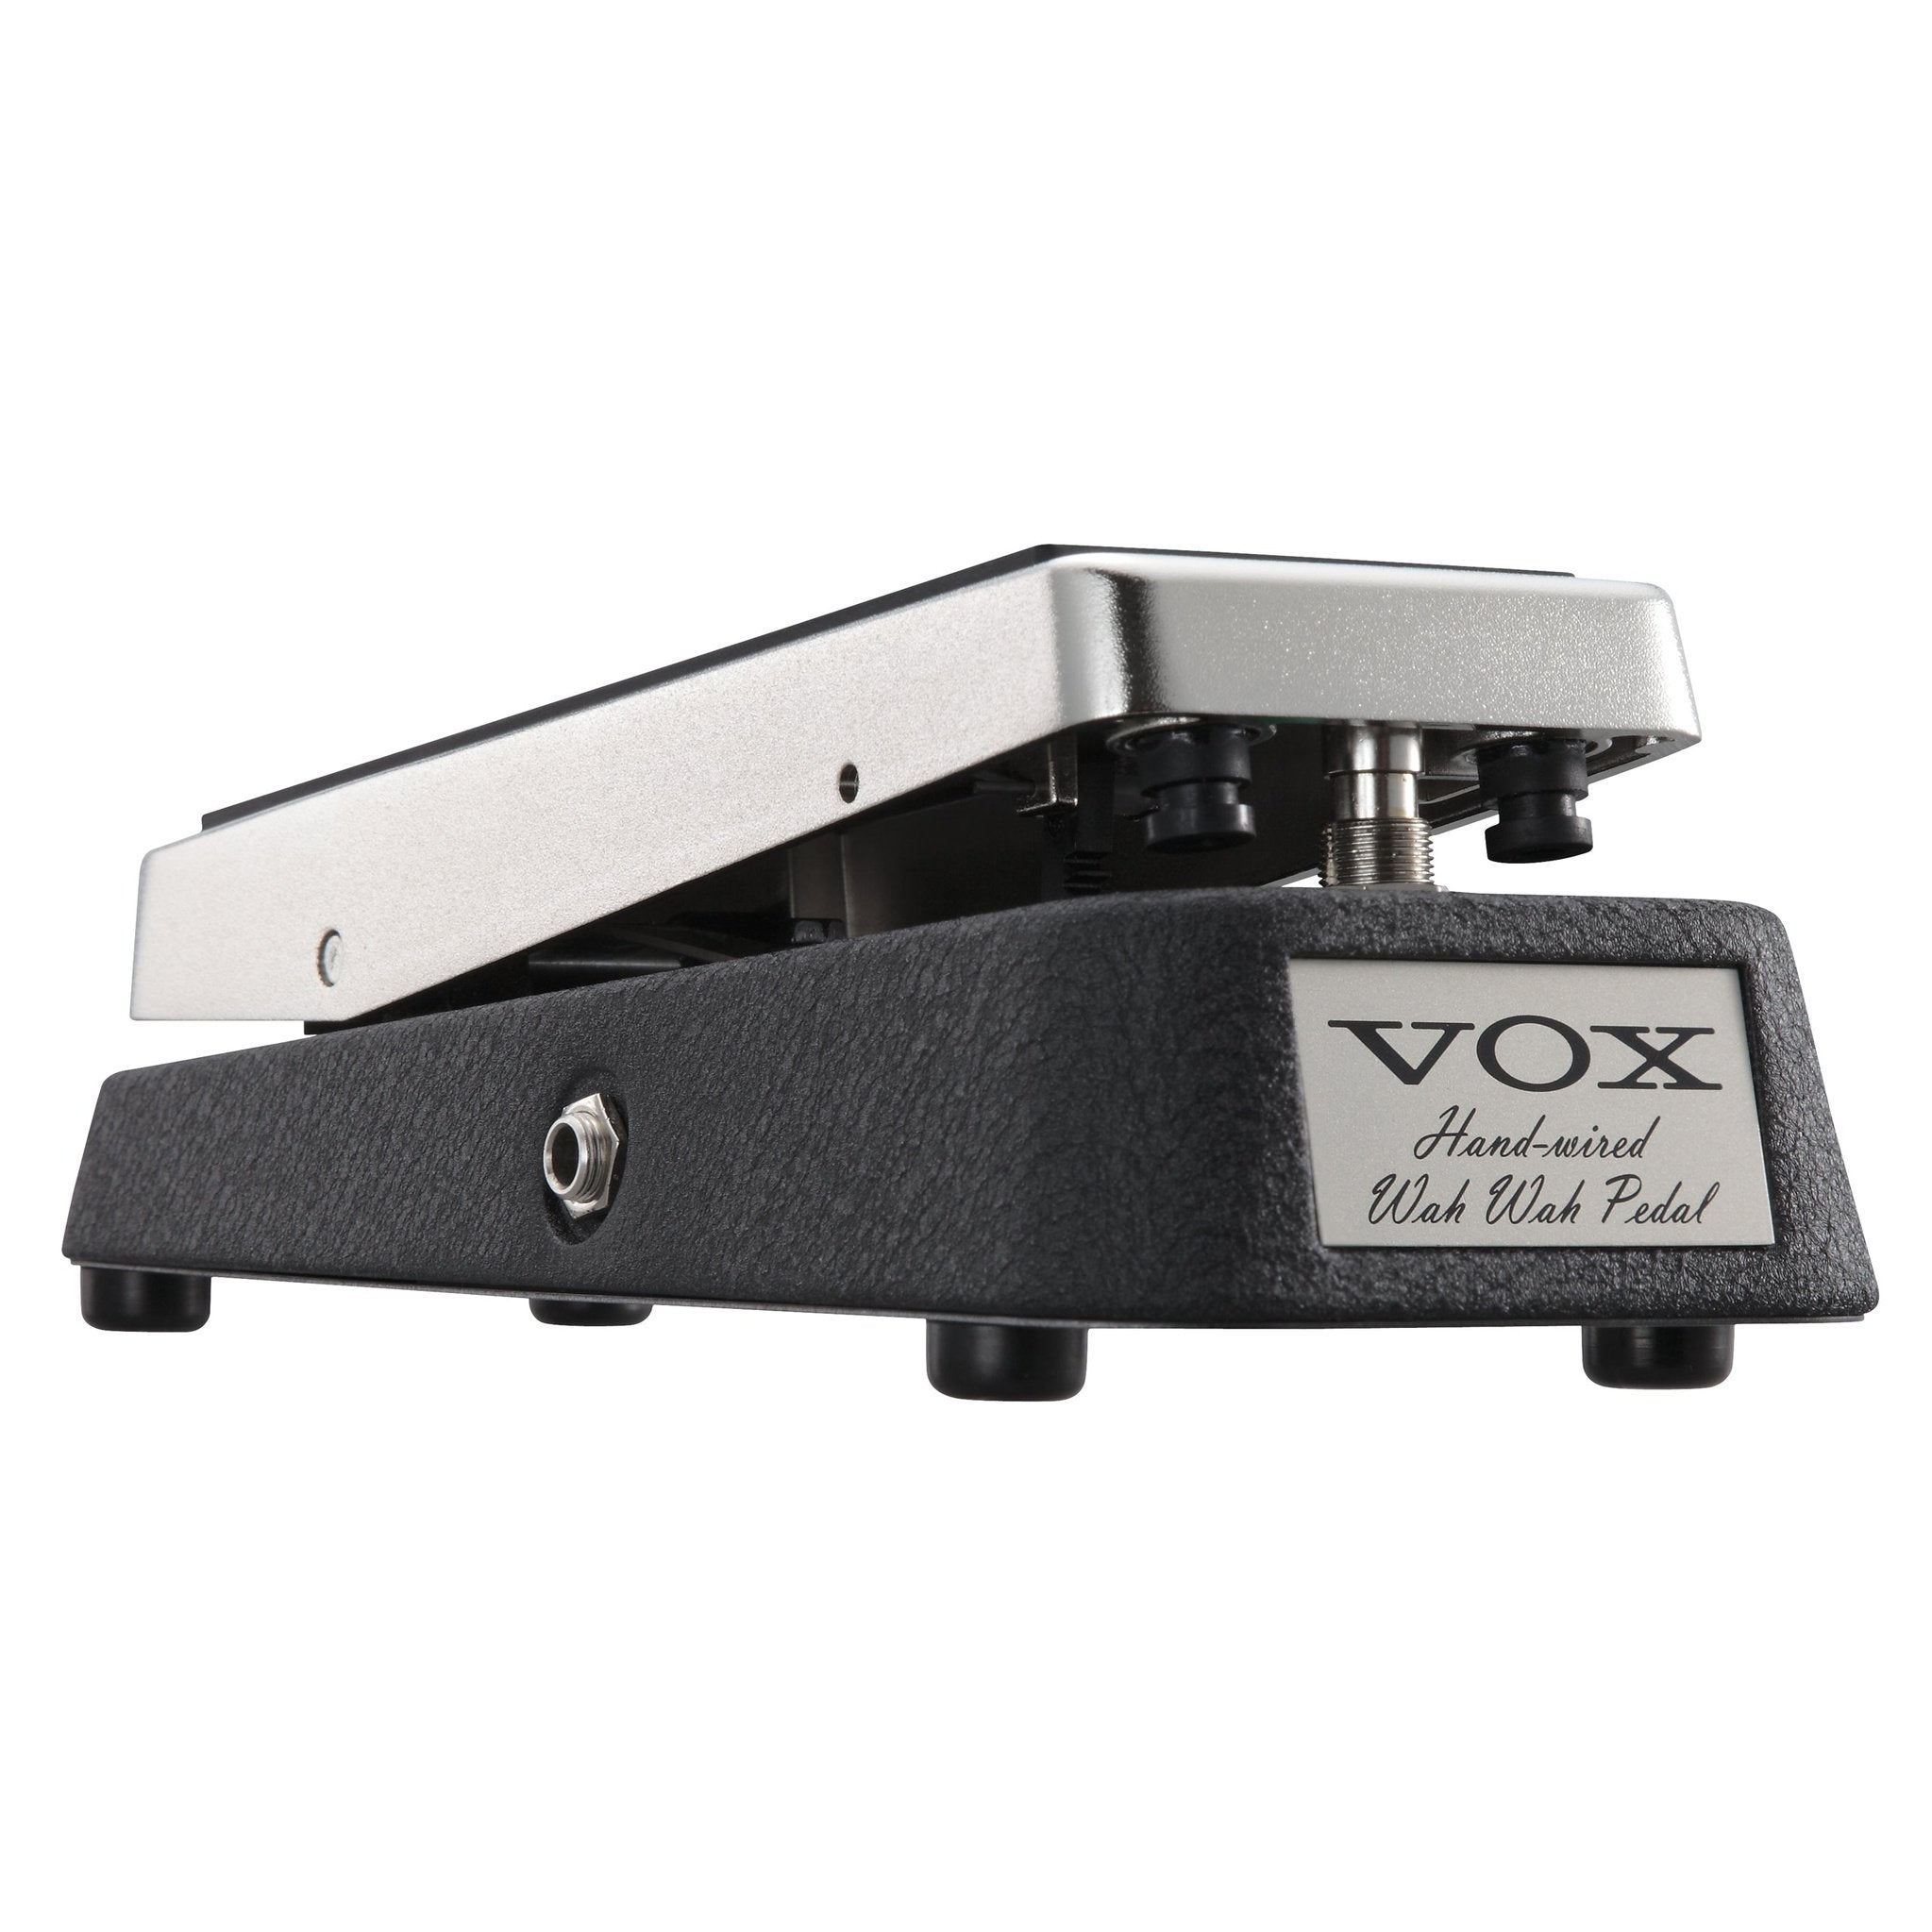 Vox V846 Hand-wired Wah Pedal 2